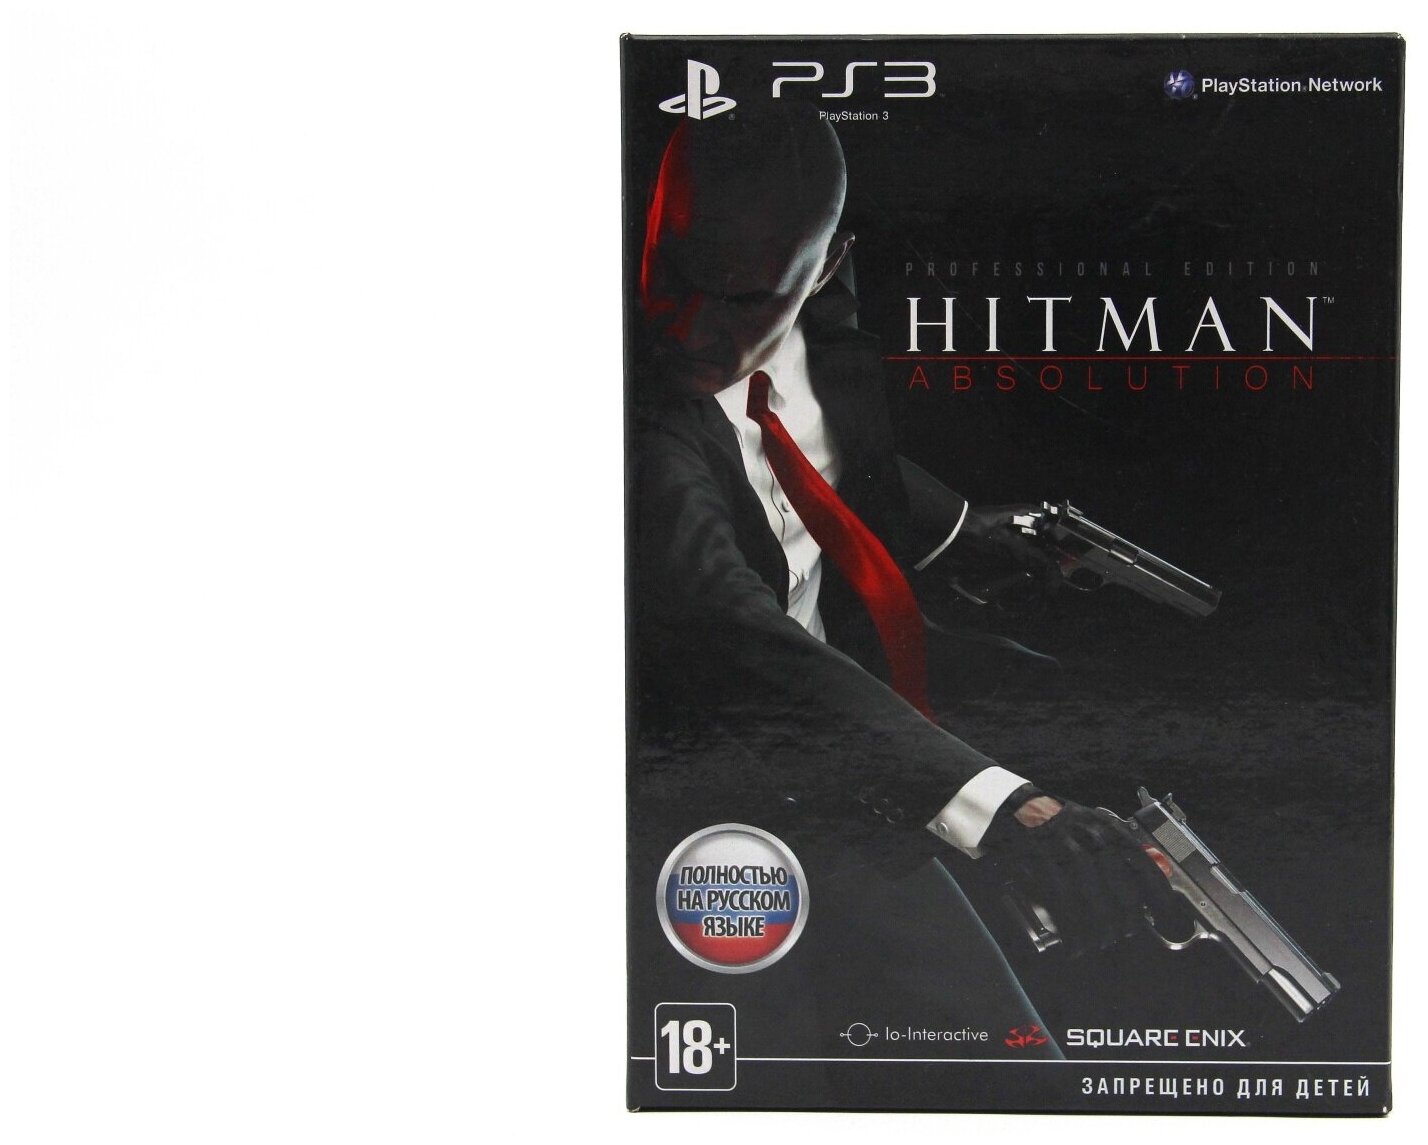 Hitman Absolution Professional Edition (PS3)